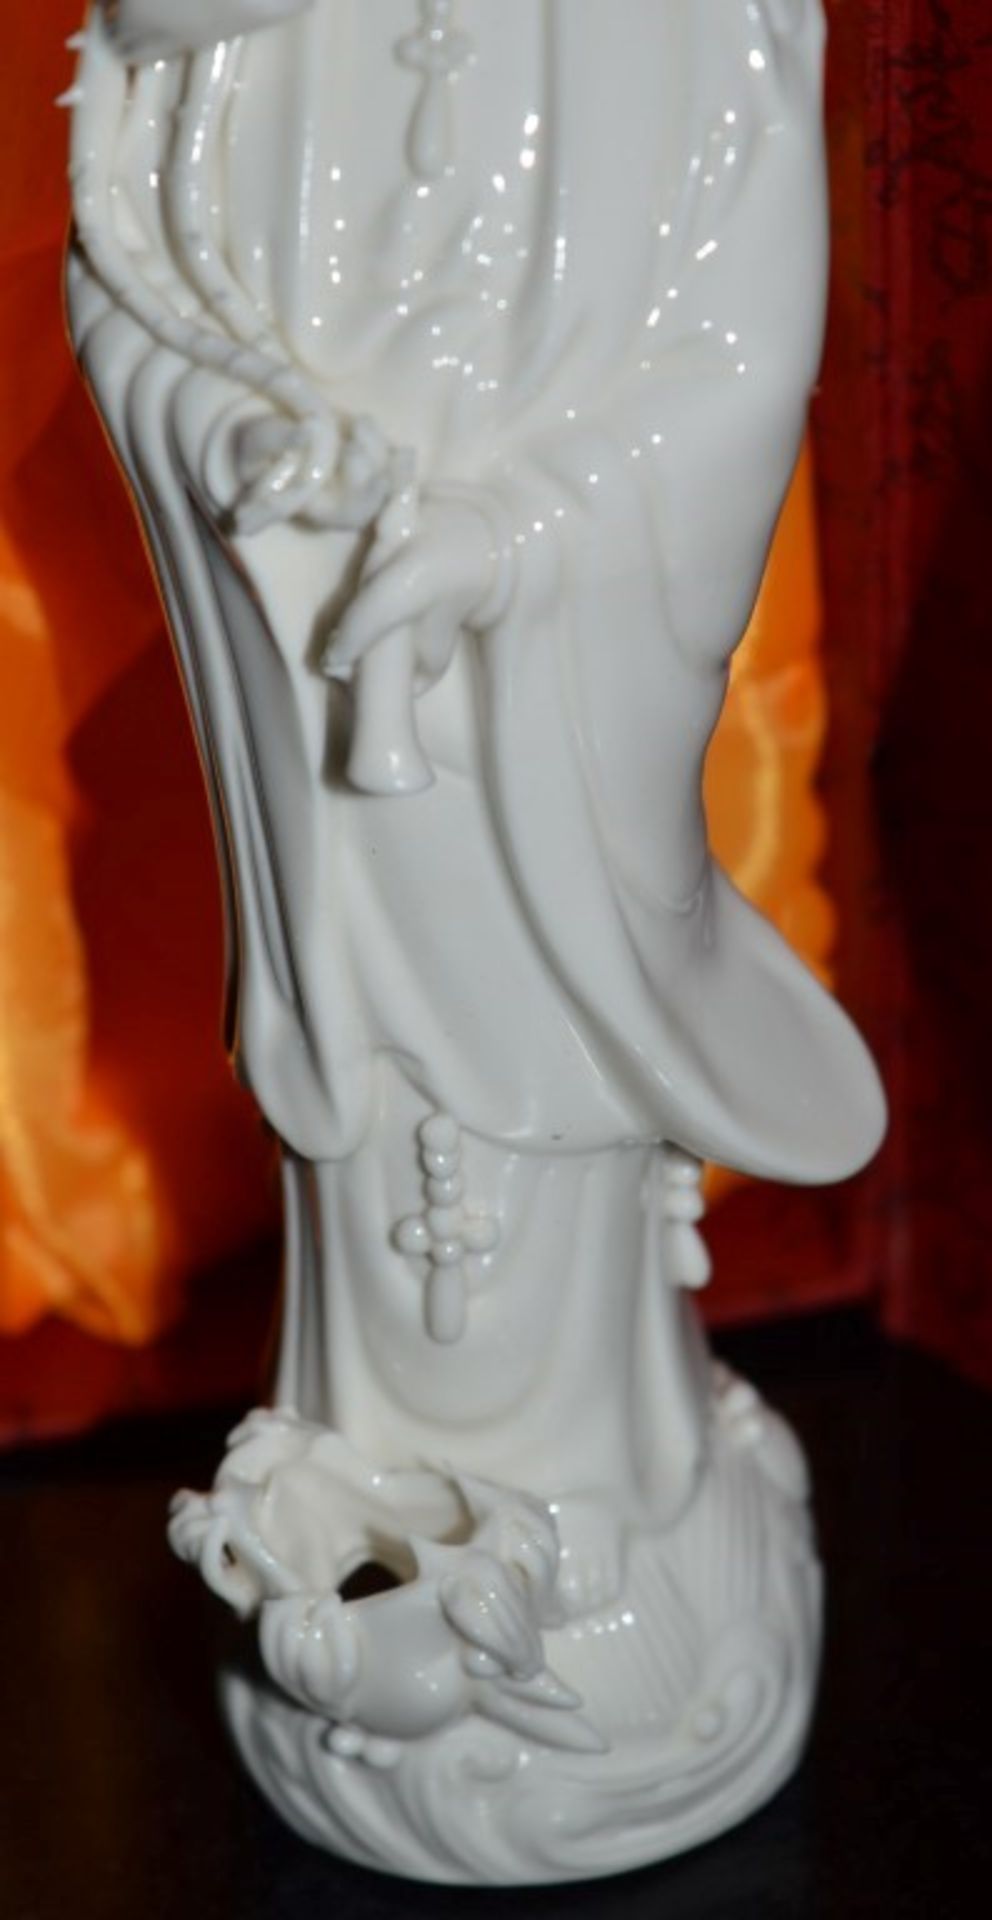 30 x Oriental Chinese Figurines in Gift Boxes - Porcelain Figurines Standing 8 Inches Tall - Brand - Image 3 of 7